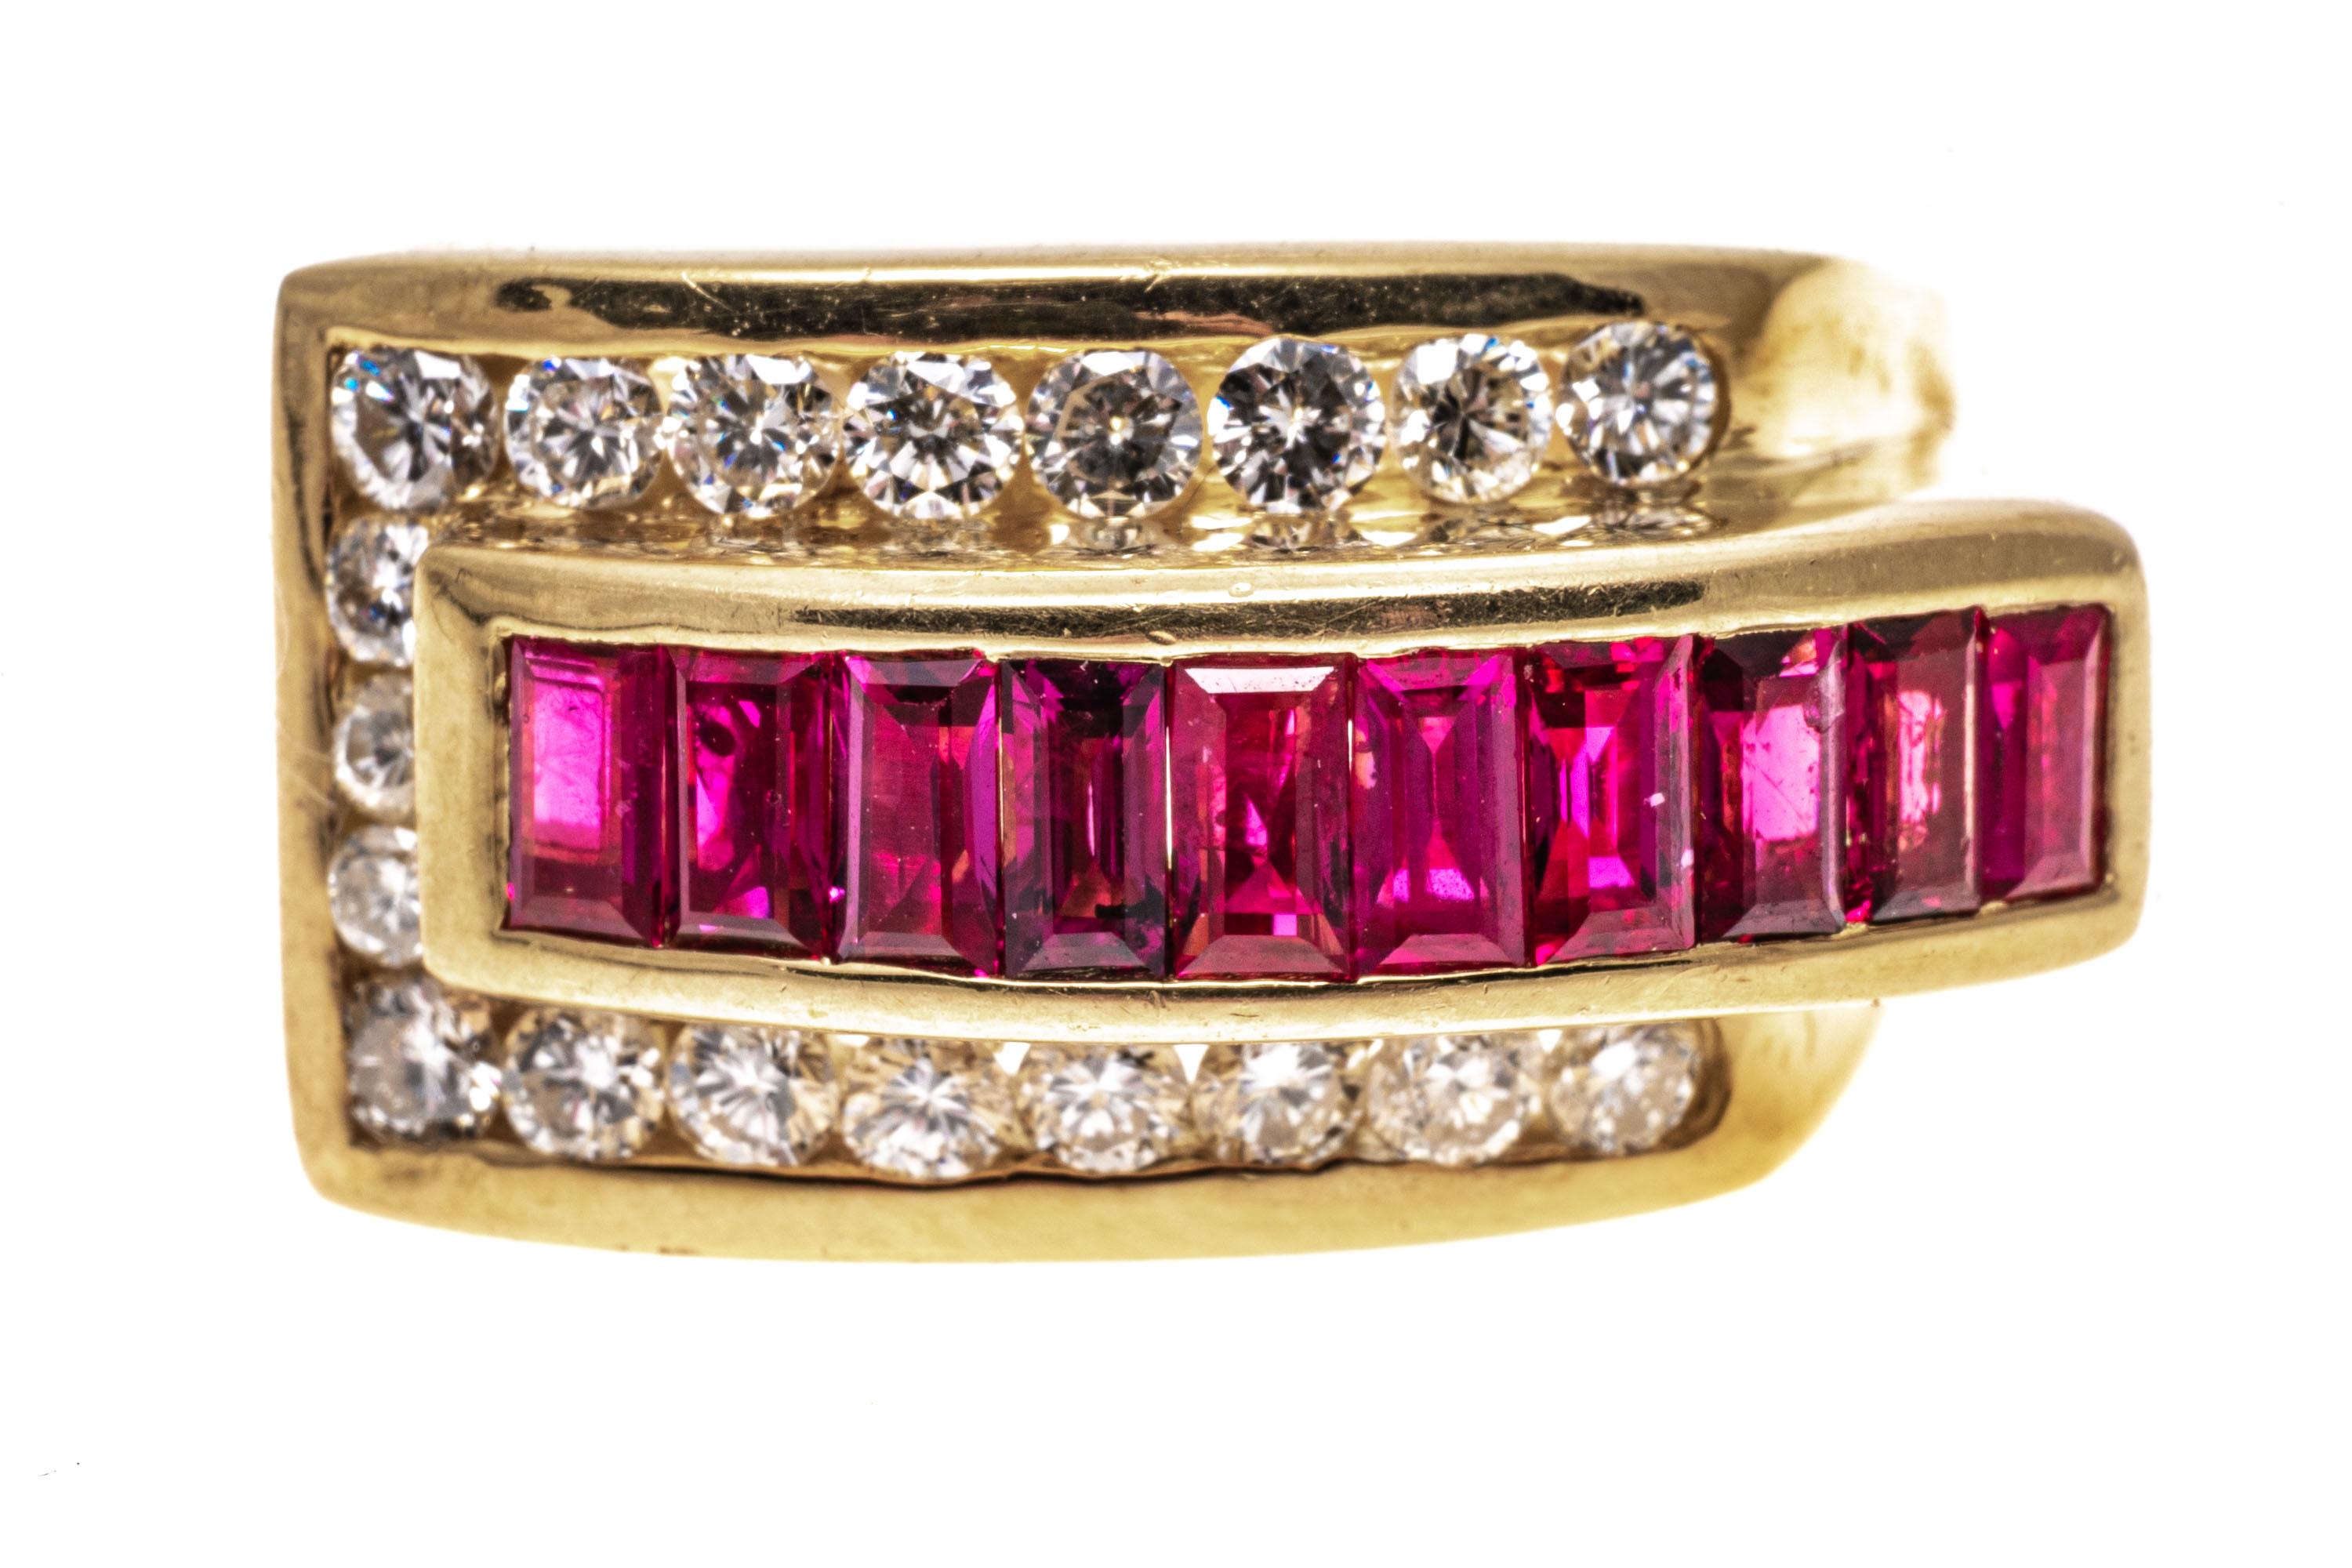 18k yellow gold ring. This beautiful retro style yellow gold ring is a buckle motif, with a center row of channel set, baguette cut pinkish red rubies, approximately 0.70 TCW, and framed by channel set round brilliant cut diamonds, approximately